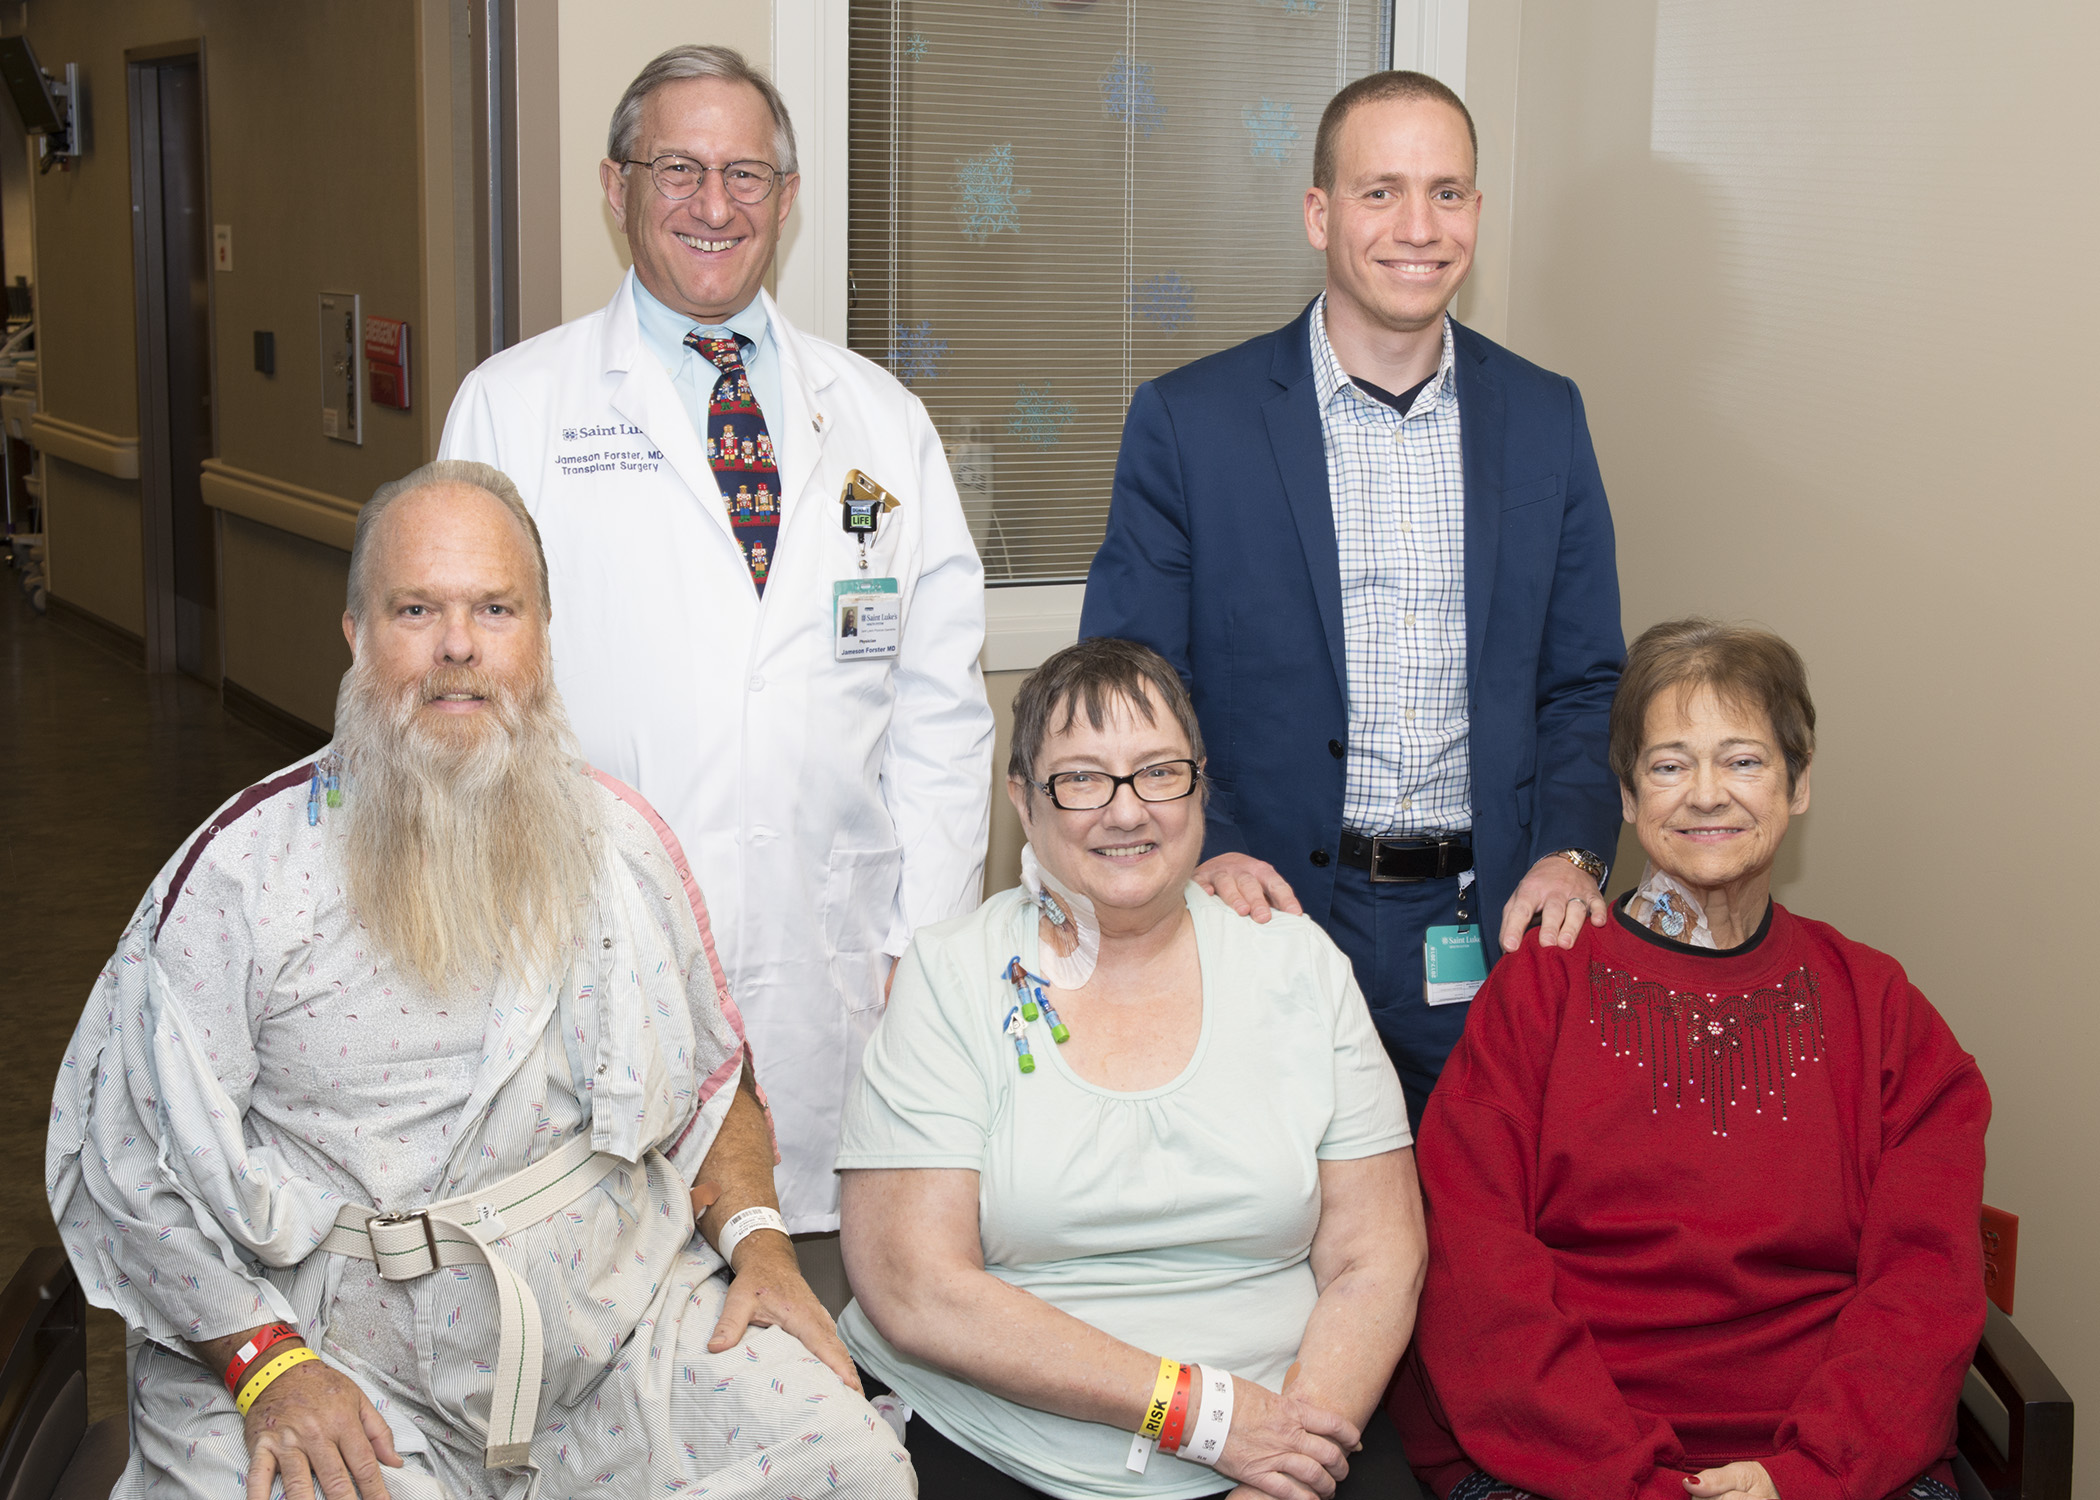 Three kidney transplant recipients and the two physicians who did the surgeries